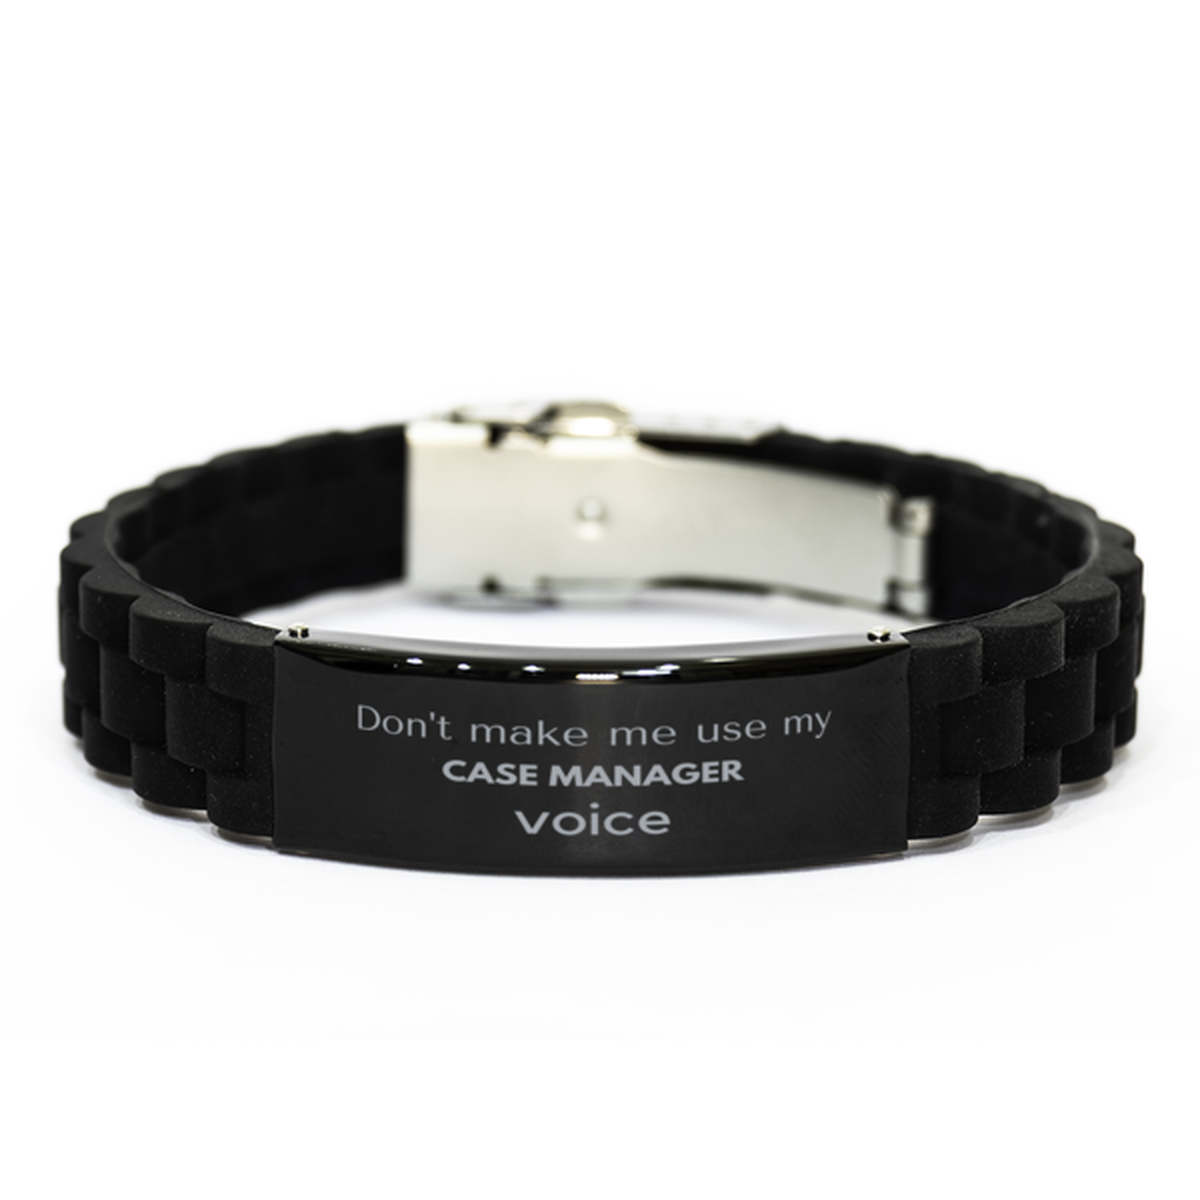 Don't make me use my Case Manager voice, Sarcasm Case Manager Gifts, Christmas Case Manager Black Glidelock Clasp Bracelet Birthday Unique Gifts For Case Manager Coworkers, Men, Women, Colleague, Friends